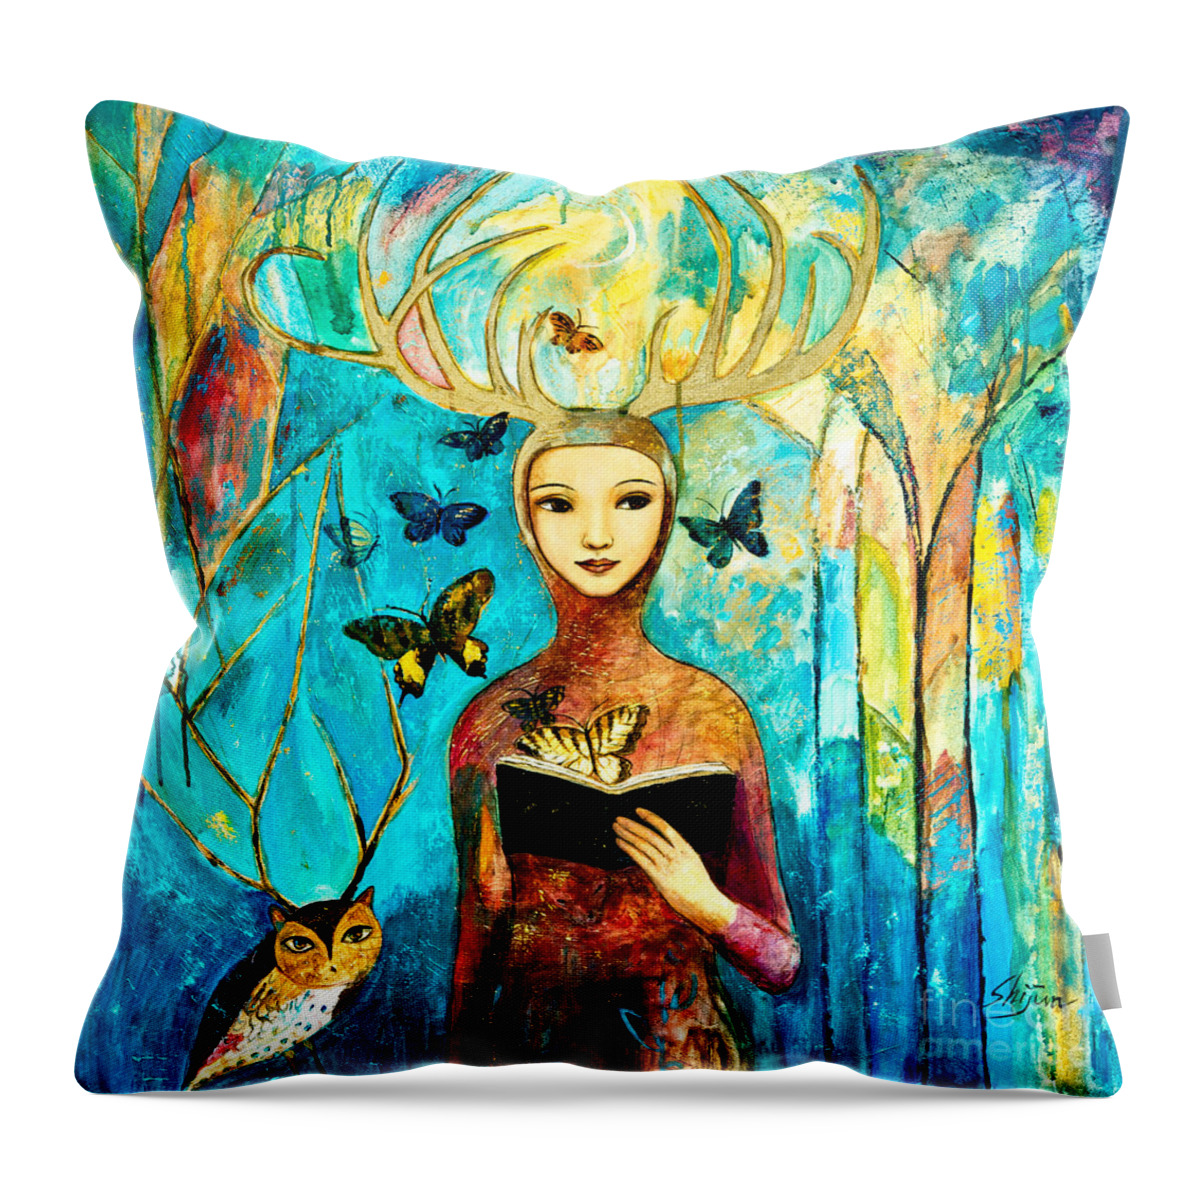 Shijun Throw Pillow featuring the painting Story of Forest by Shijun Munns